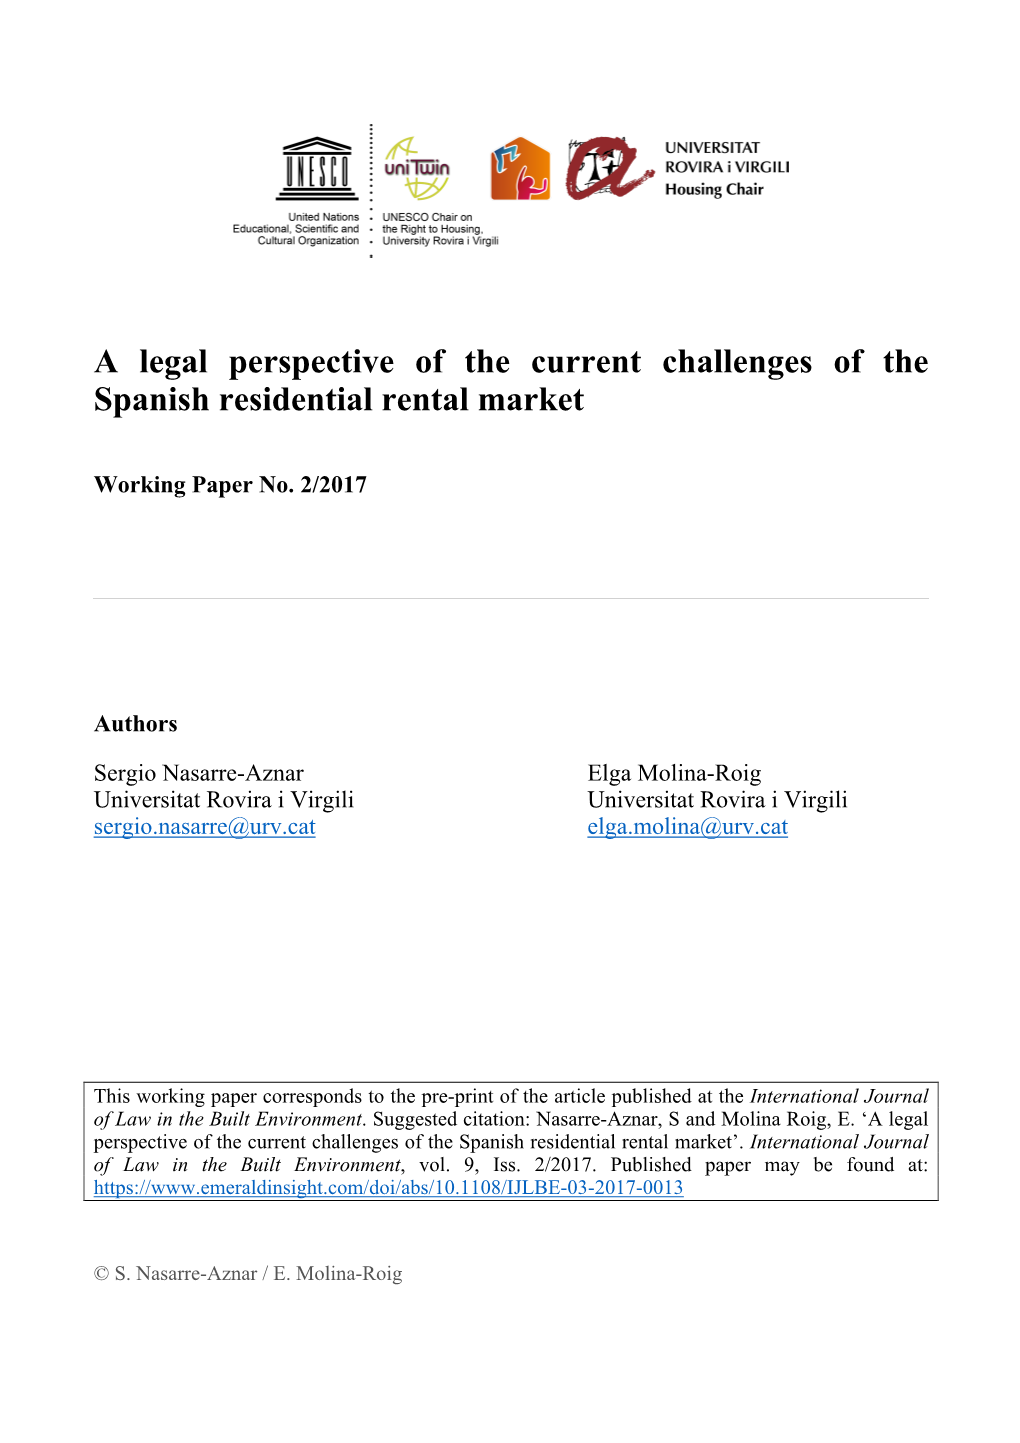 A Legal Perspective of the Current Challenges of the Spanish Residential Rental Market